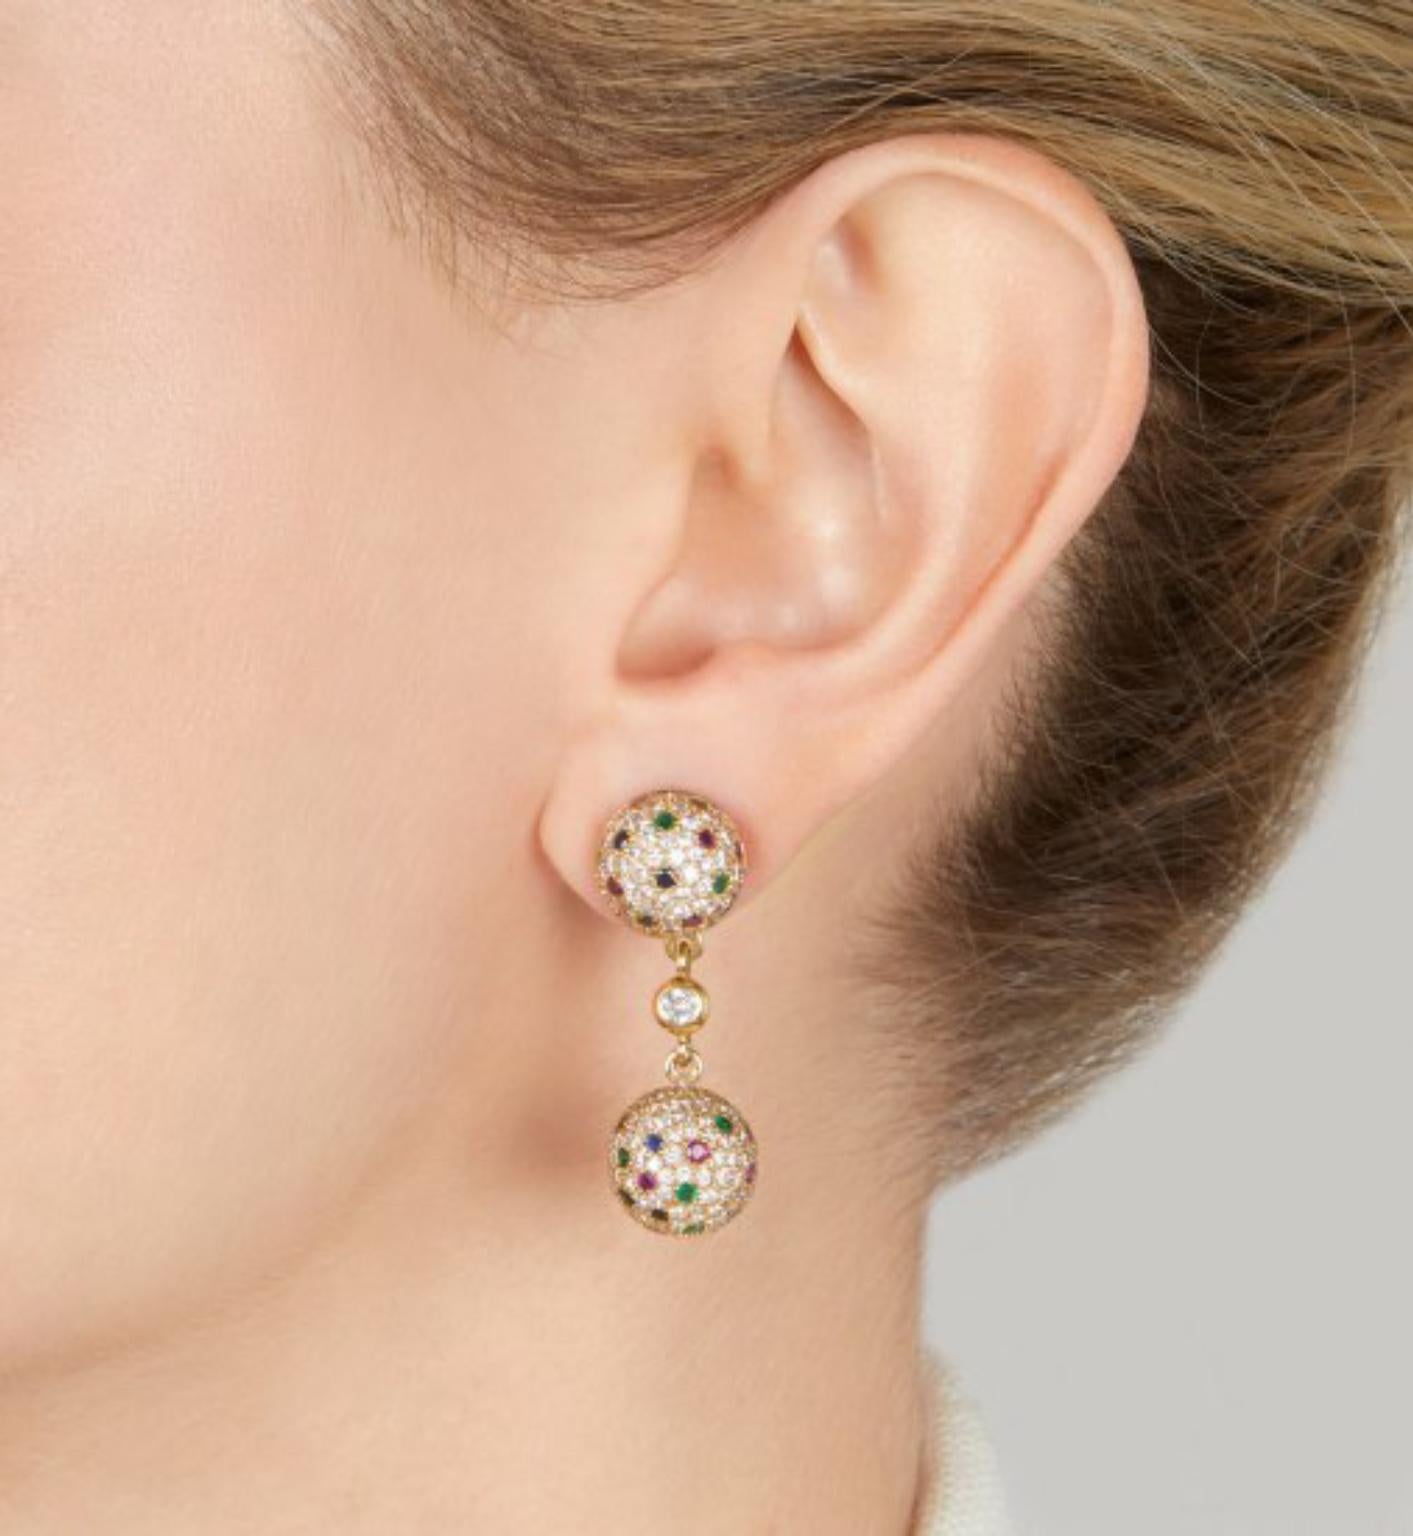 A chic pair of round brilliant-cut diamond and 18 karat yellow gold earrings with removable drops, embellished with round rubies, emeralds and sapphires. Length approximately 1.25 inches